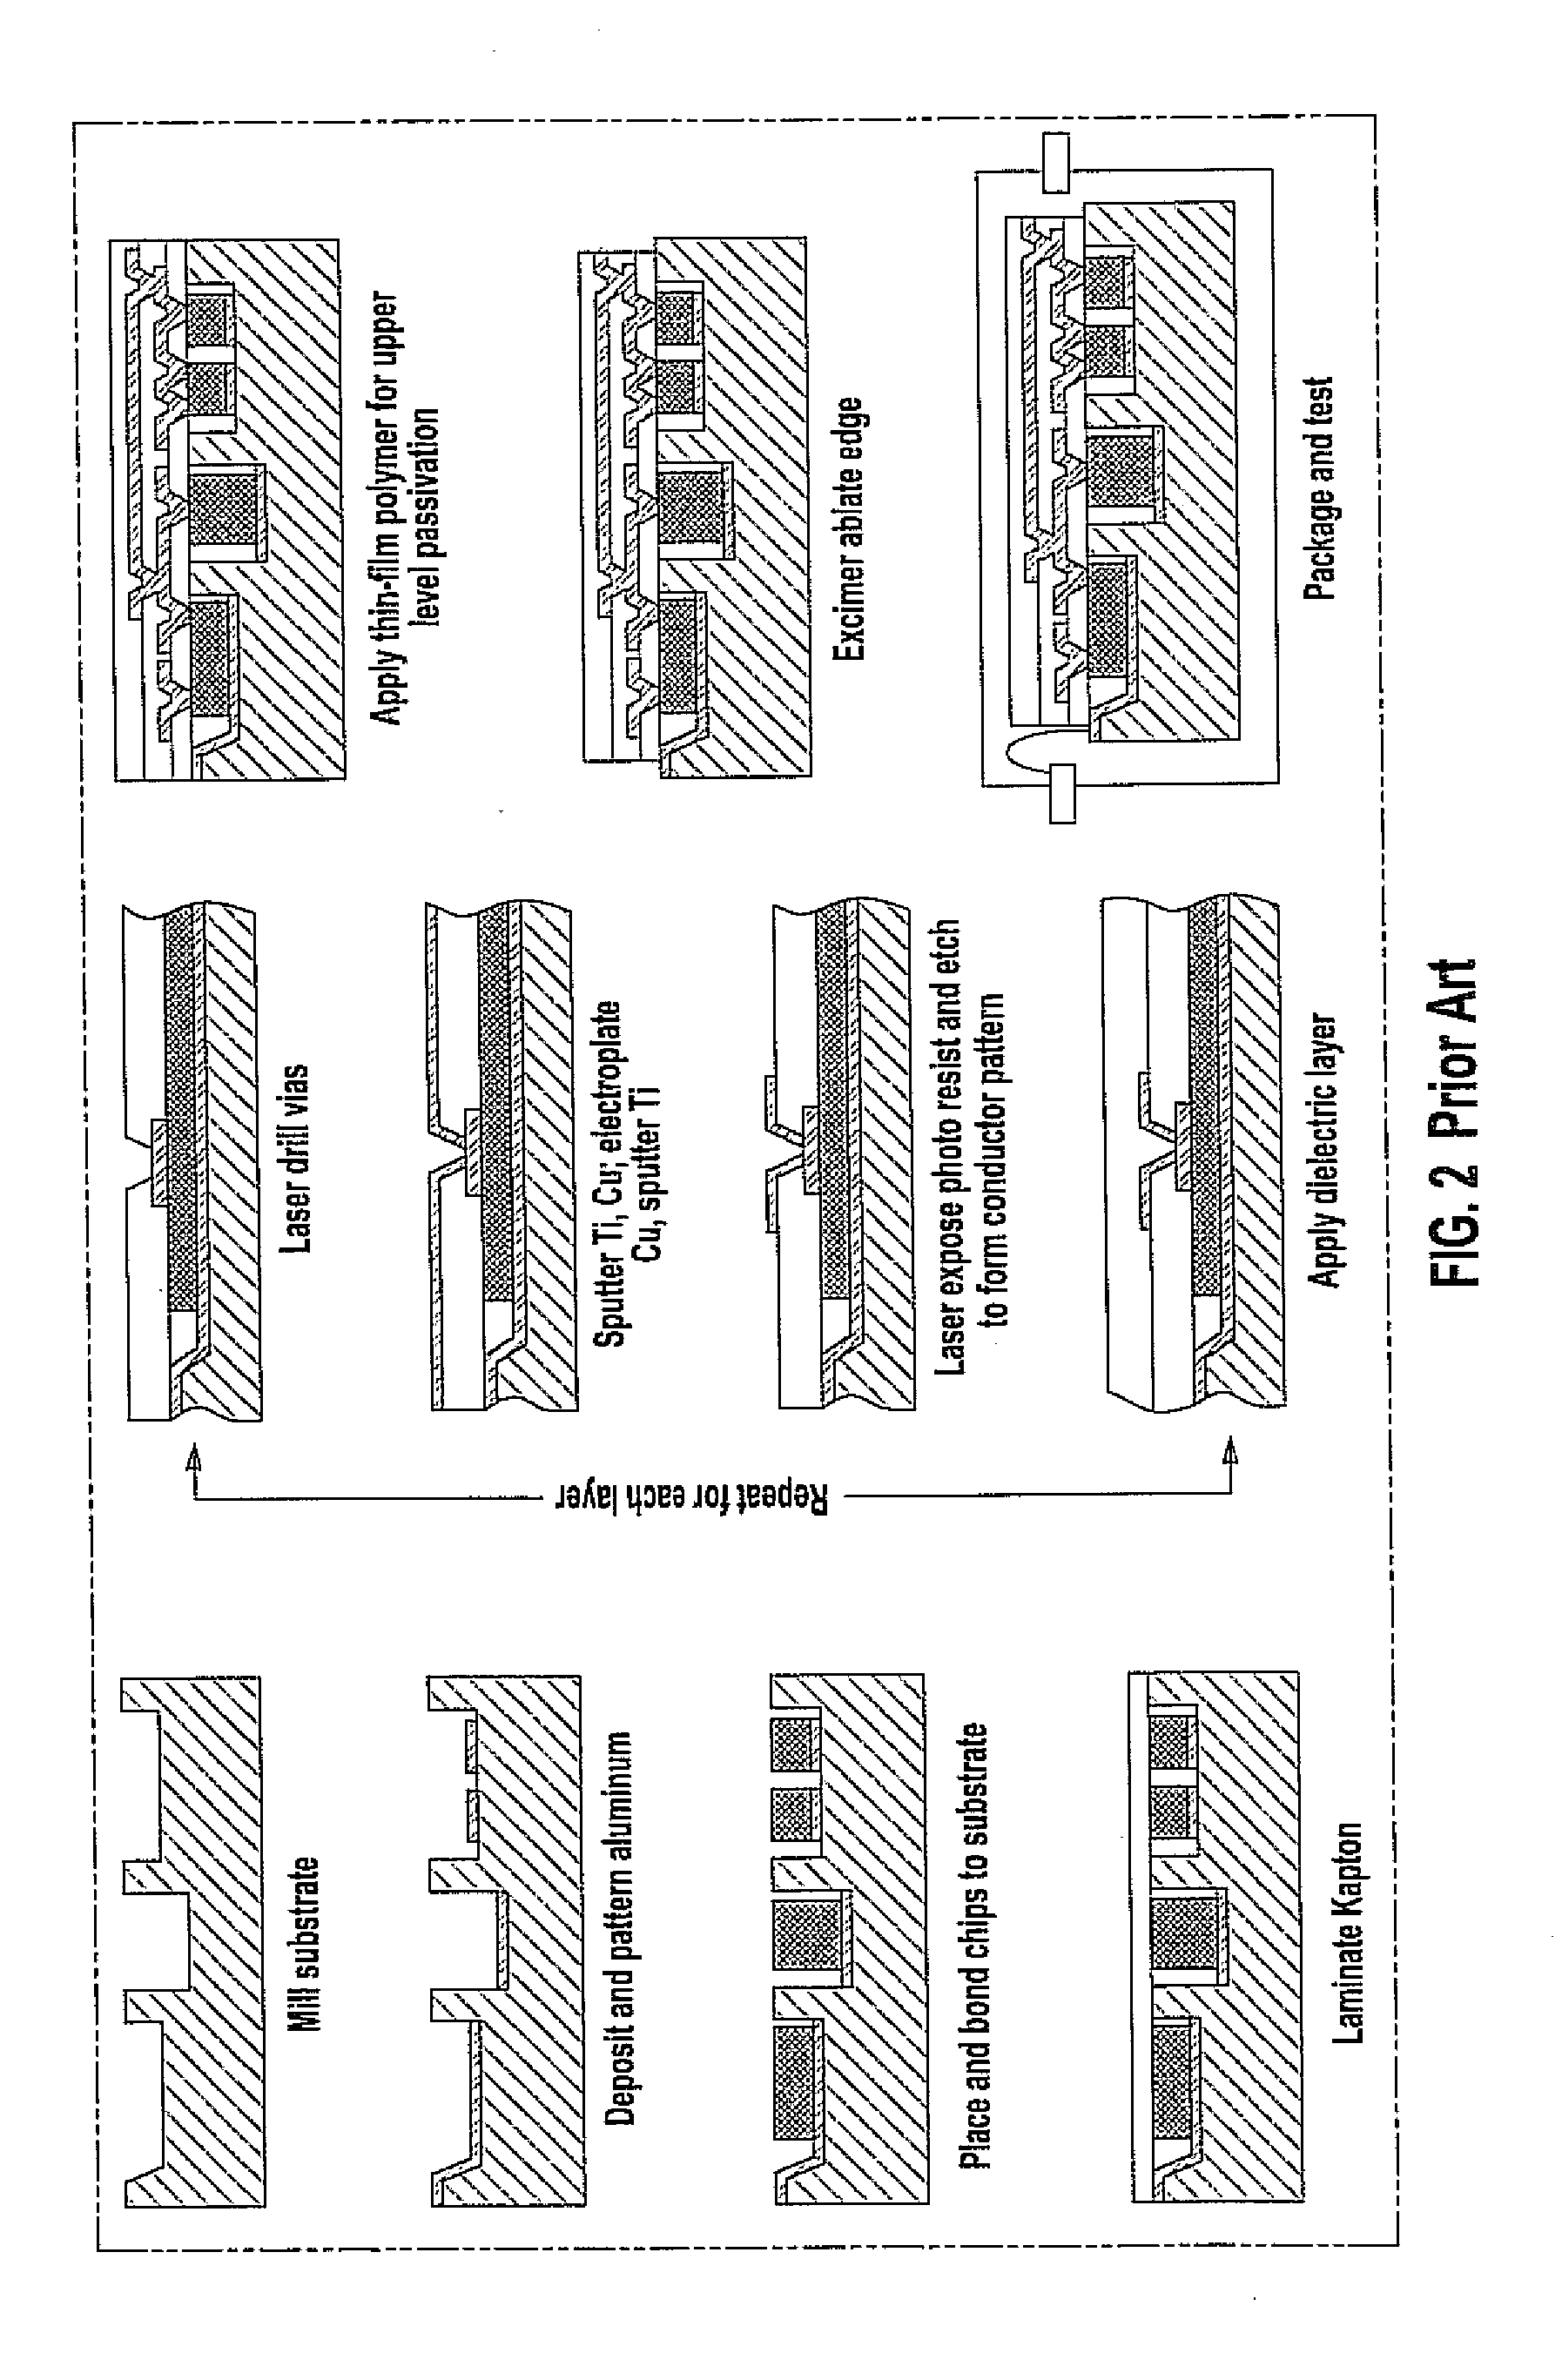 Method of forming monolithic cmos-mems hybrid integrated, packaged structures